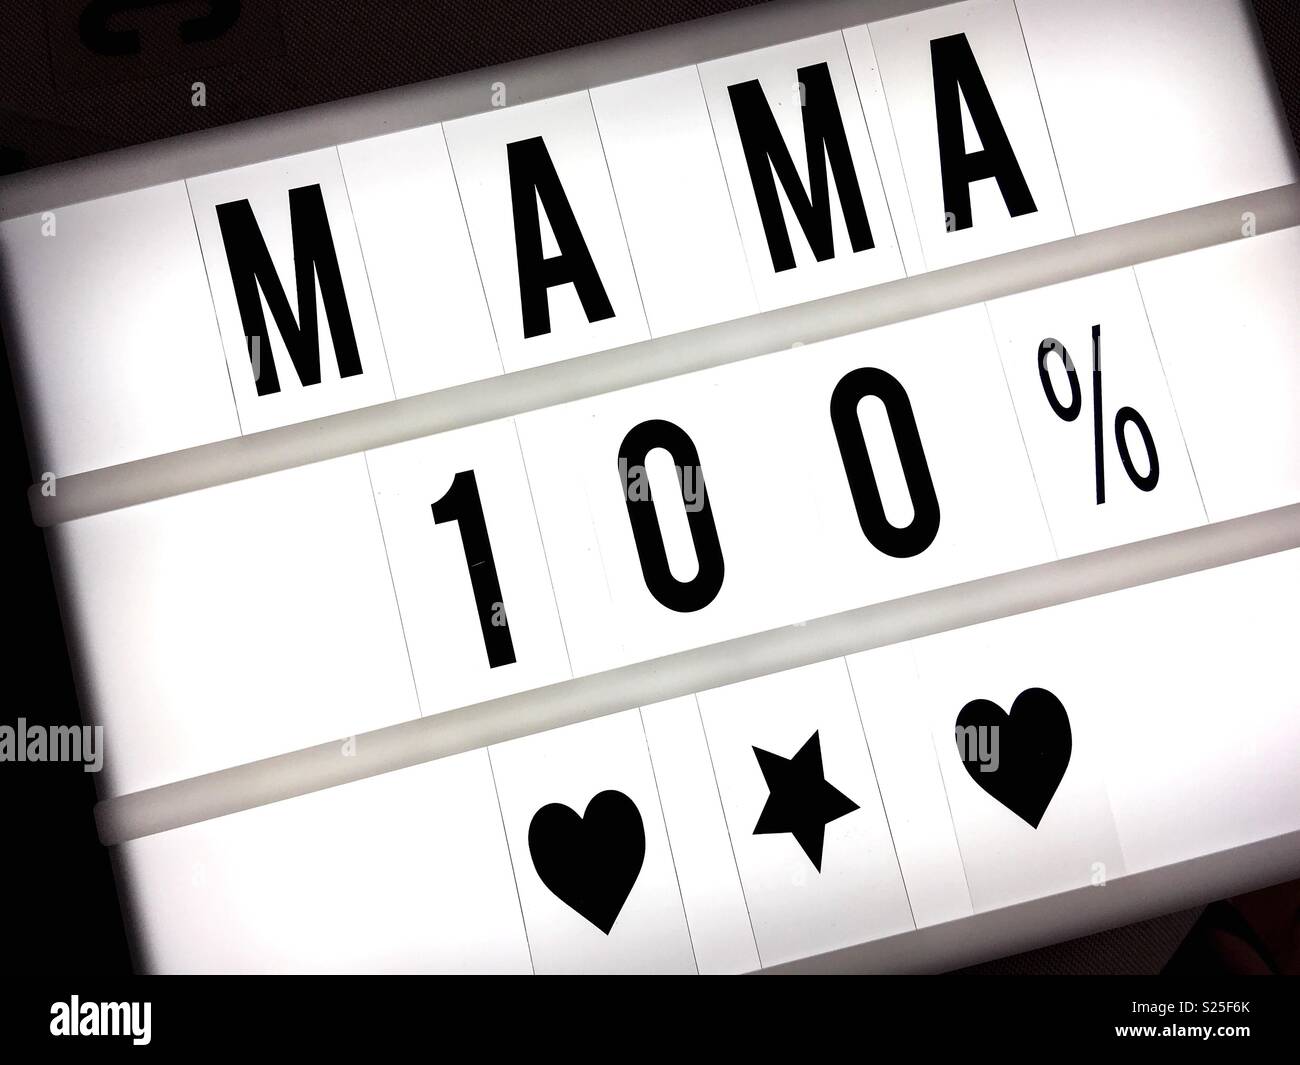 Mama spelled out in capital letters on a lightbox Stock Photo